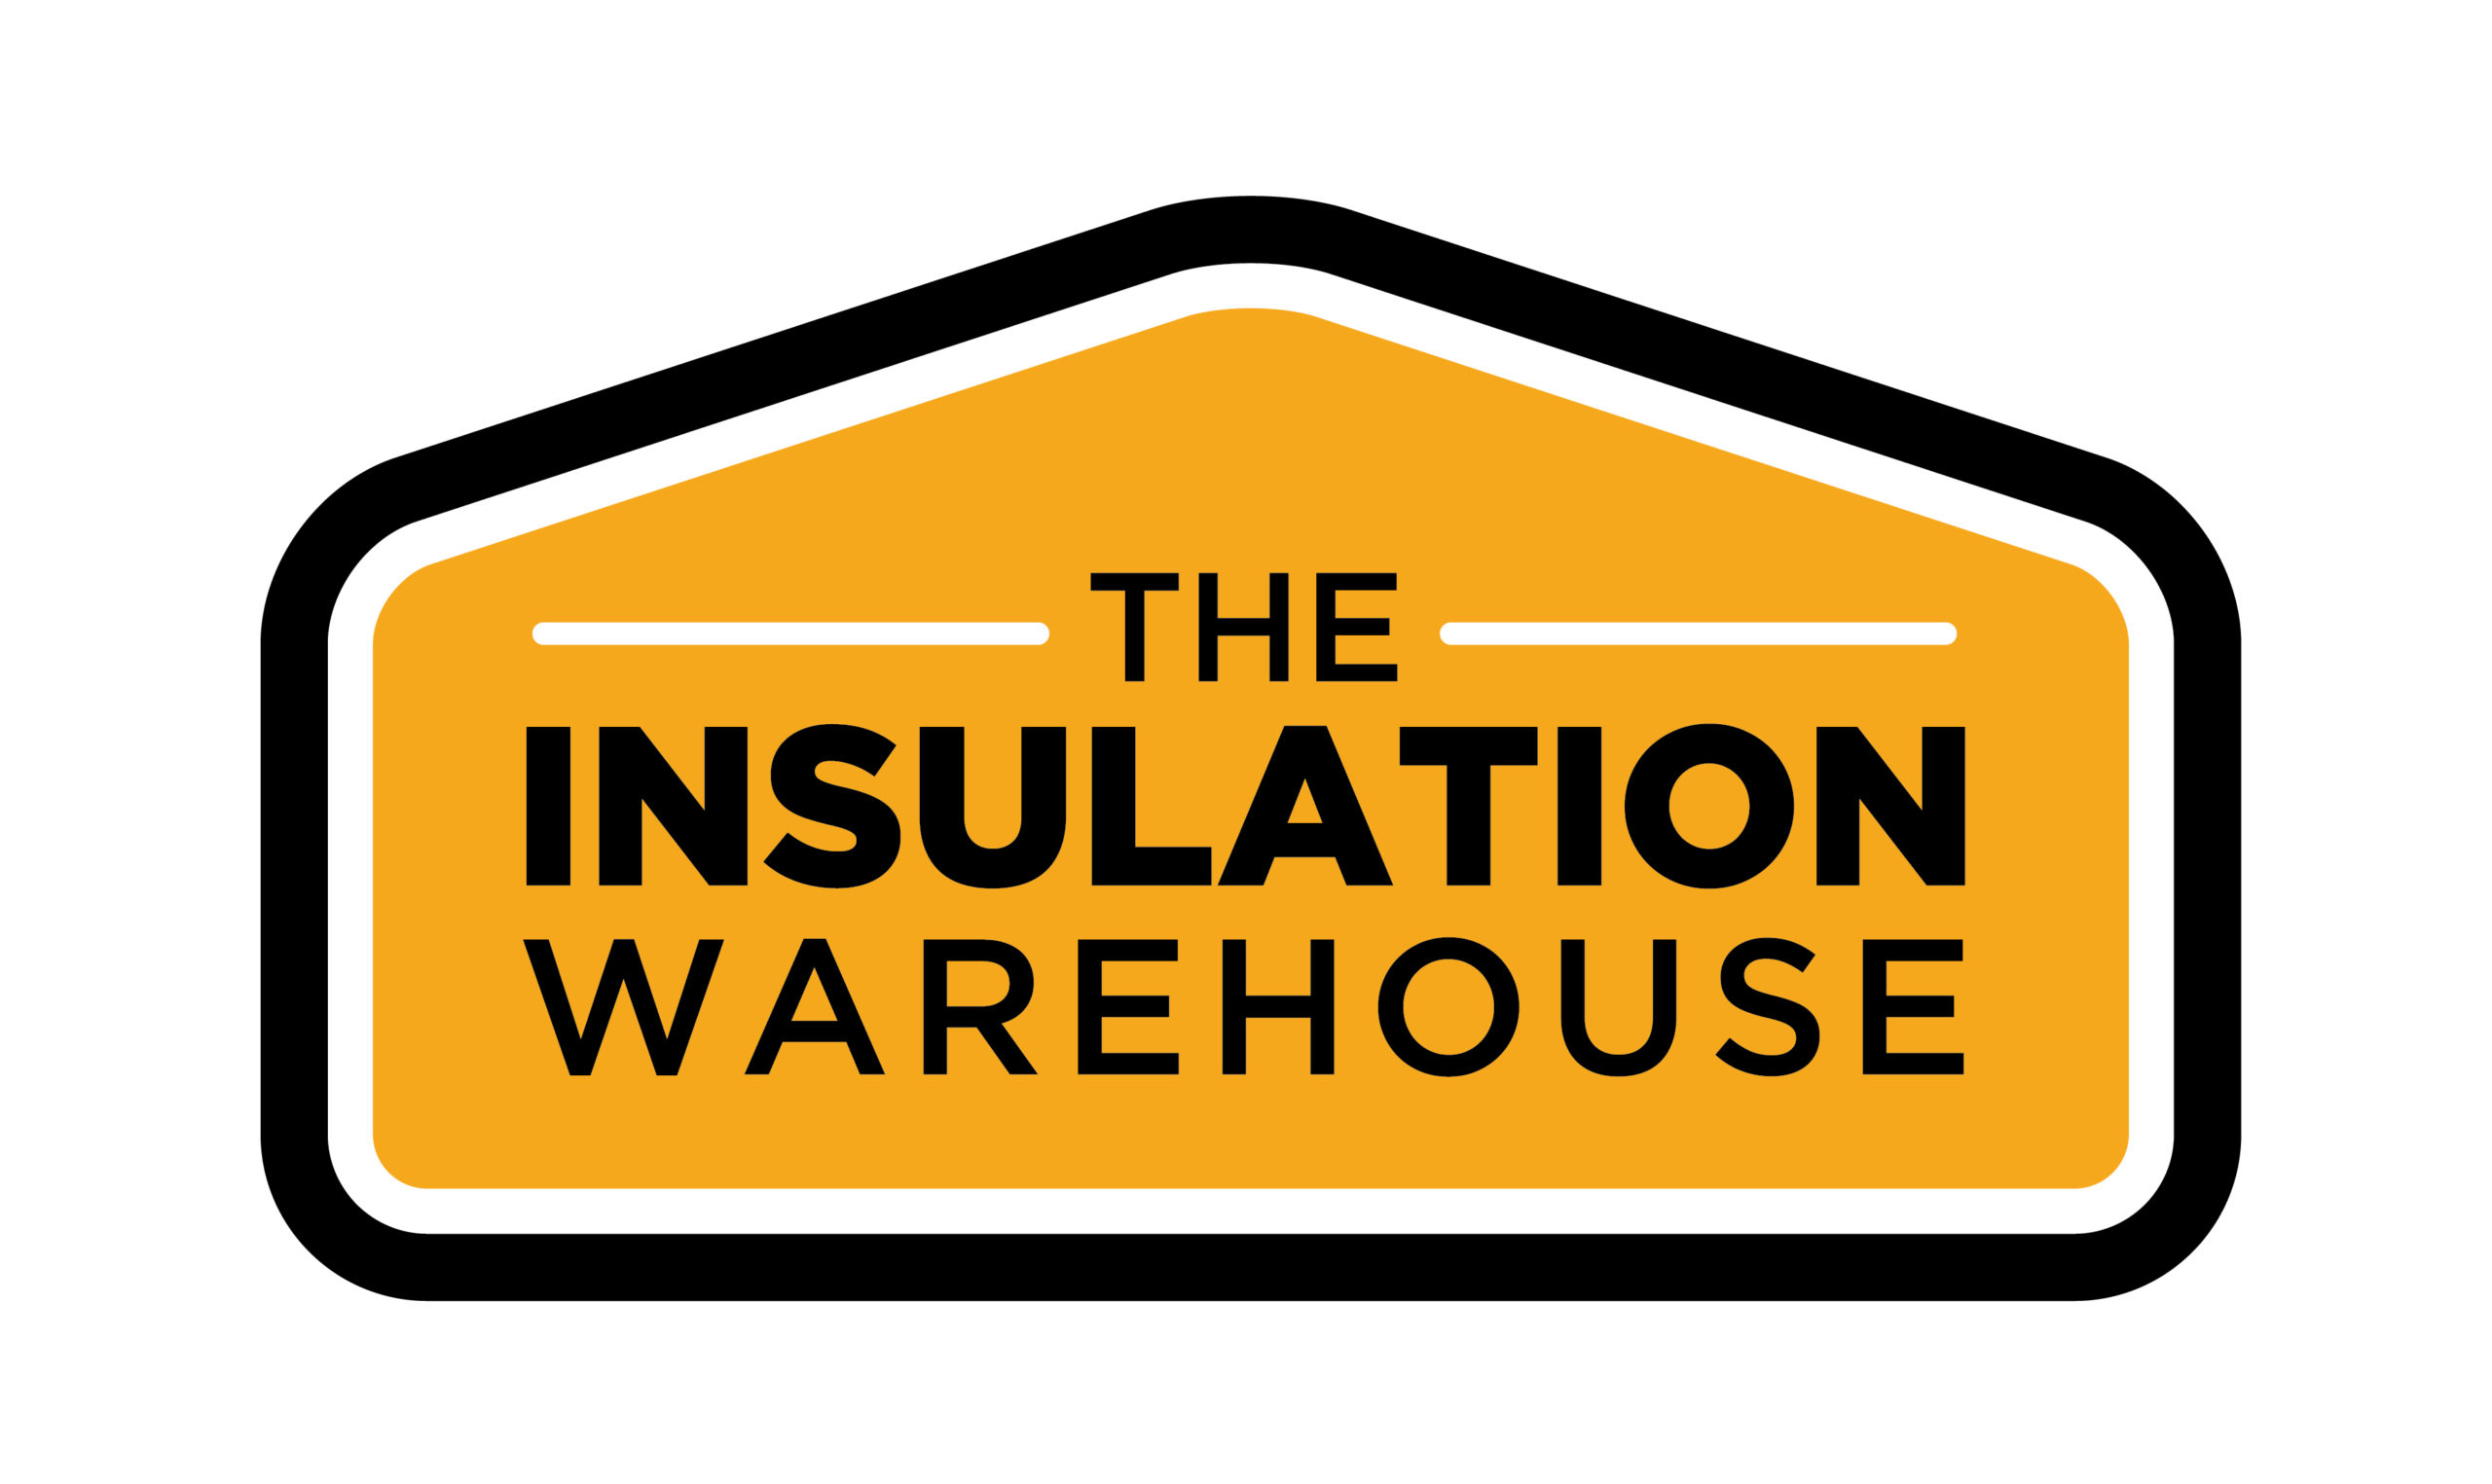 The Insulation Warehouse Limited